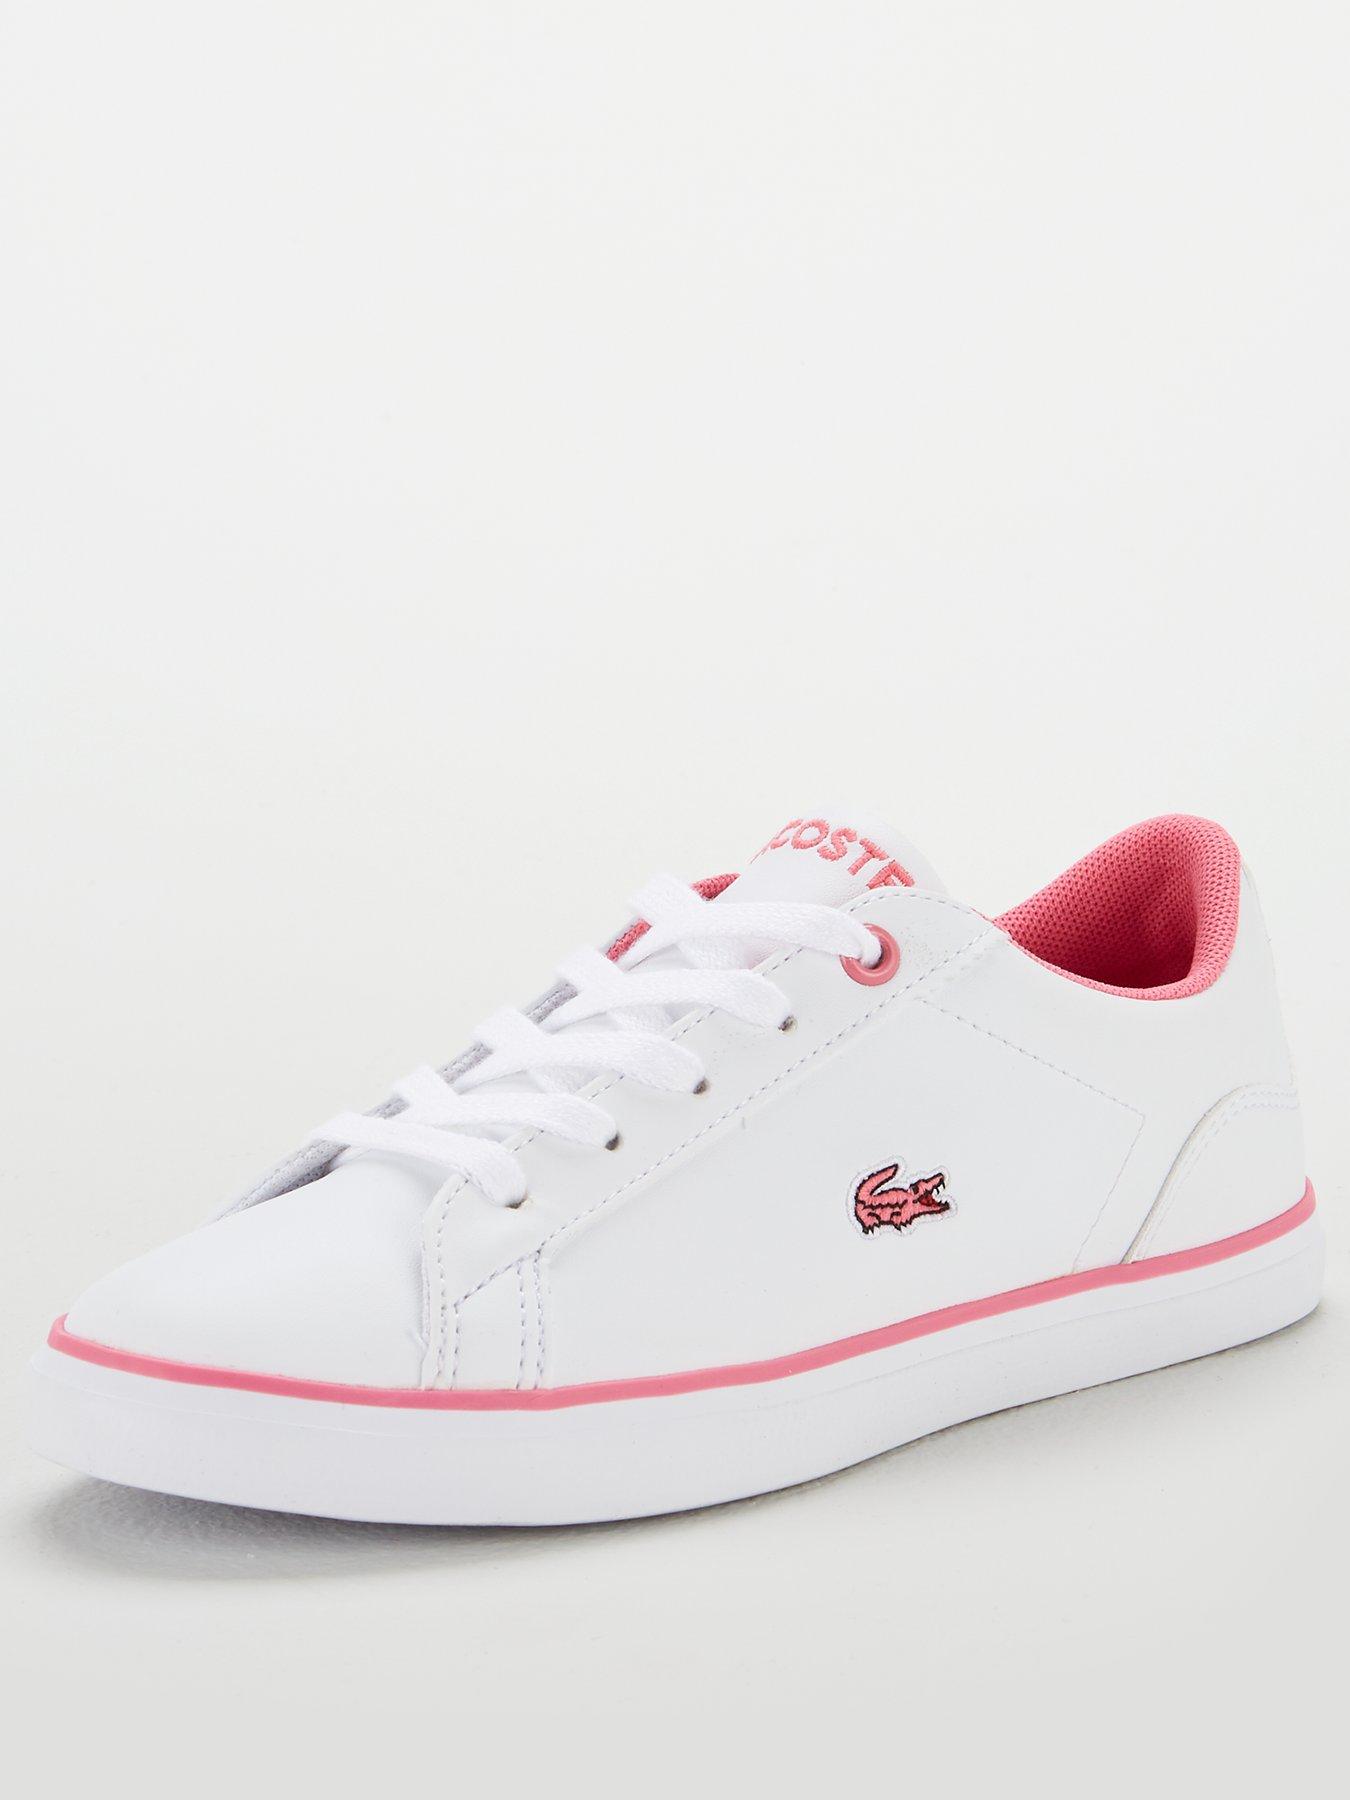 lacoste lerond bl 2 trainer pink